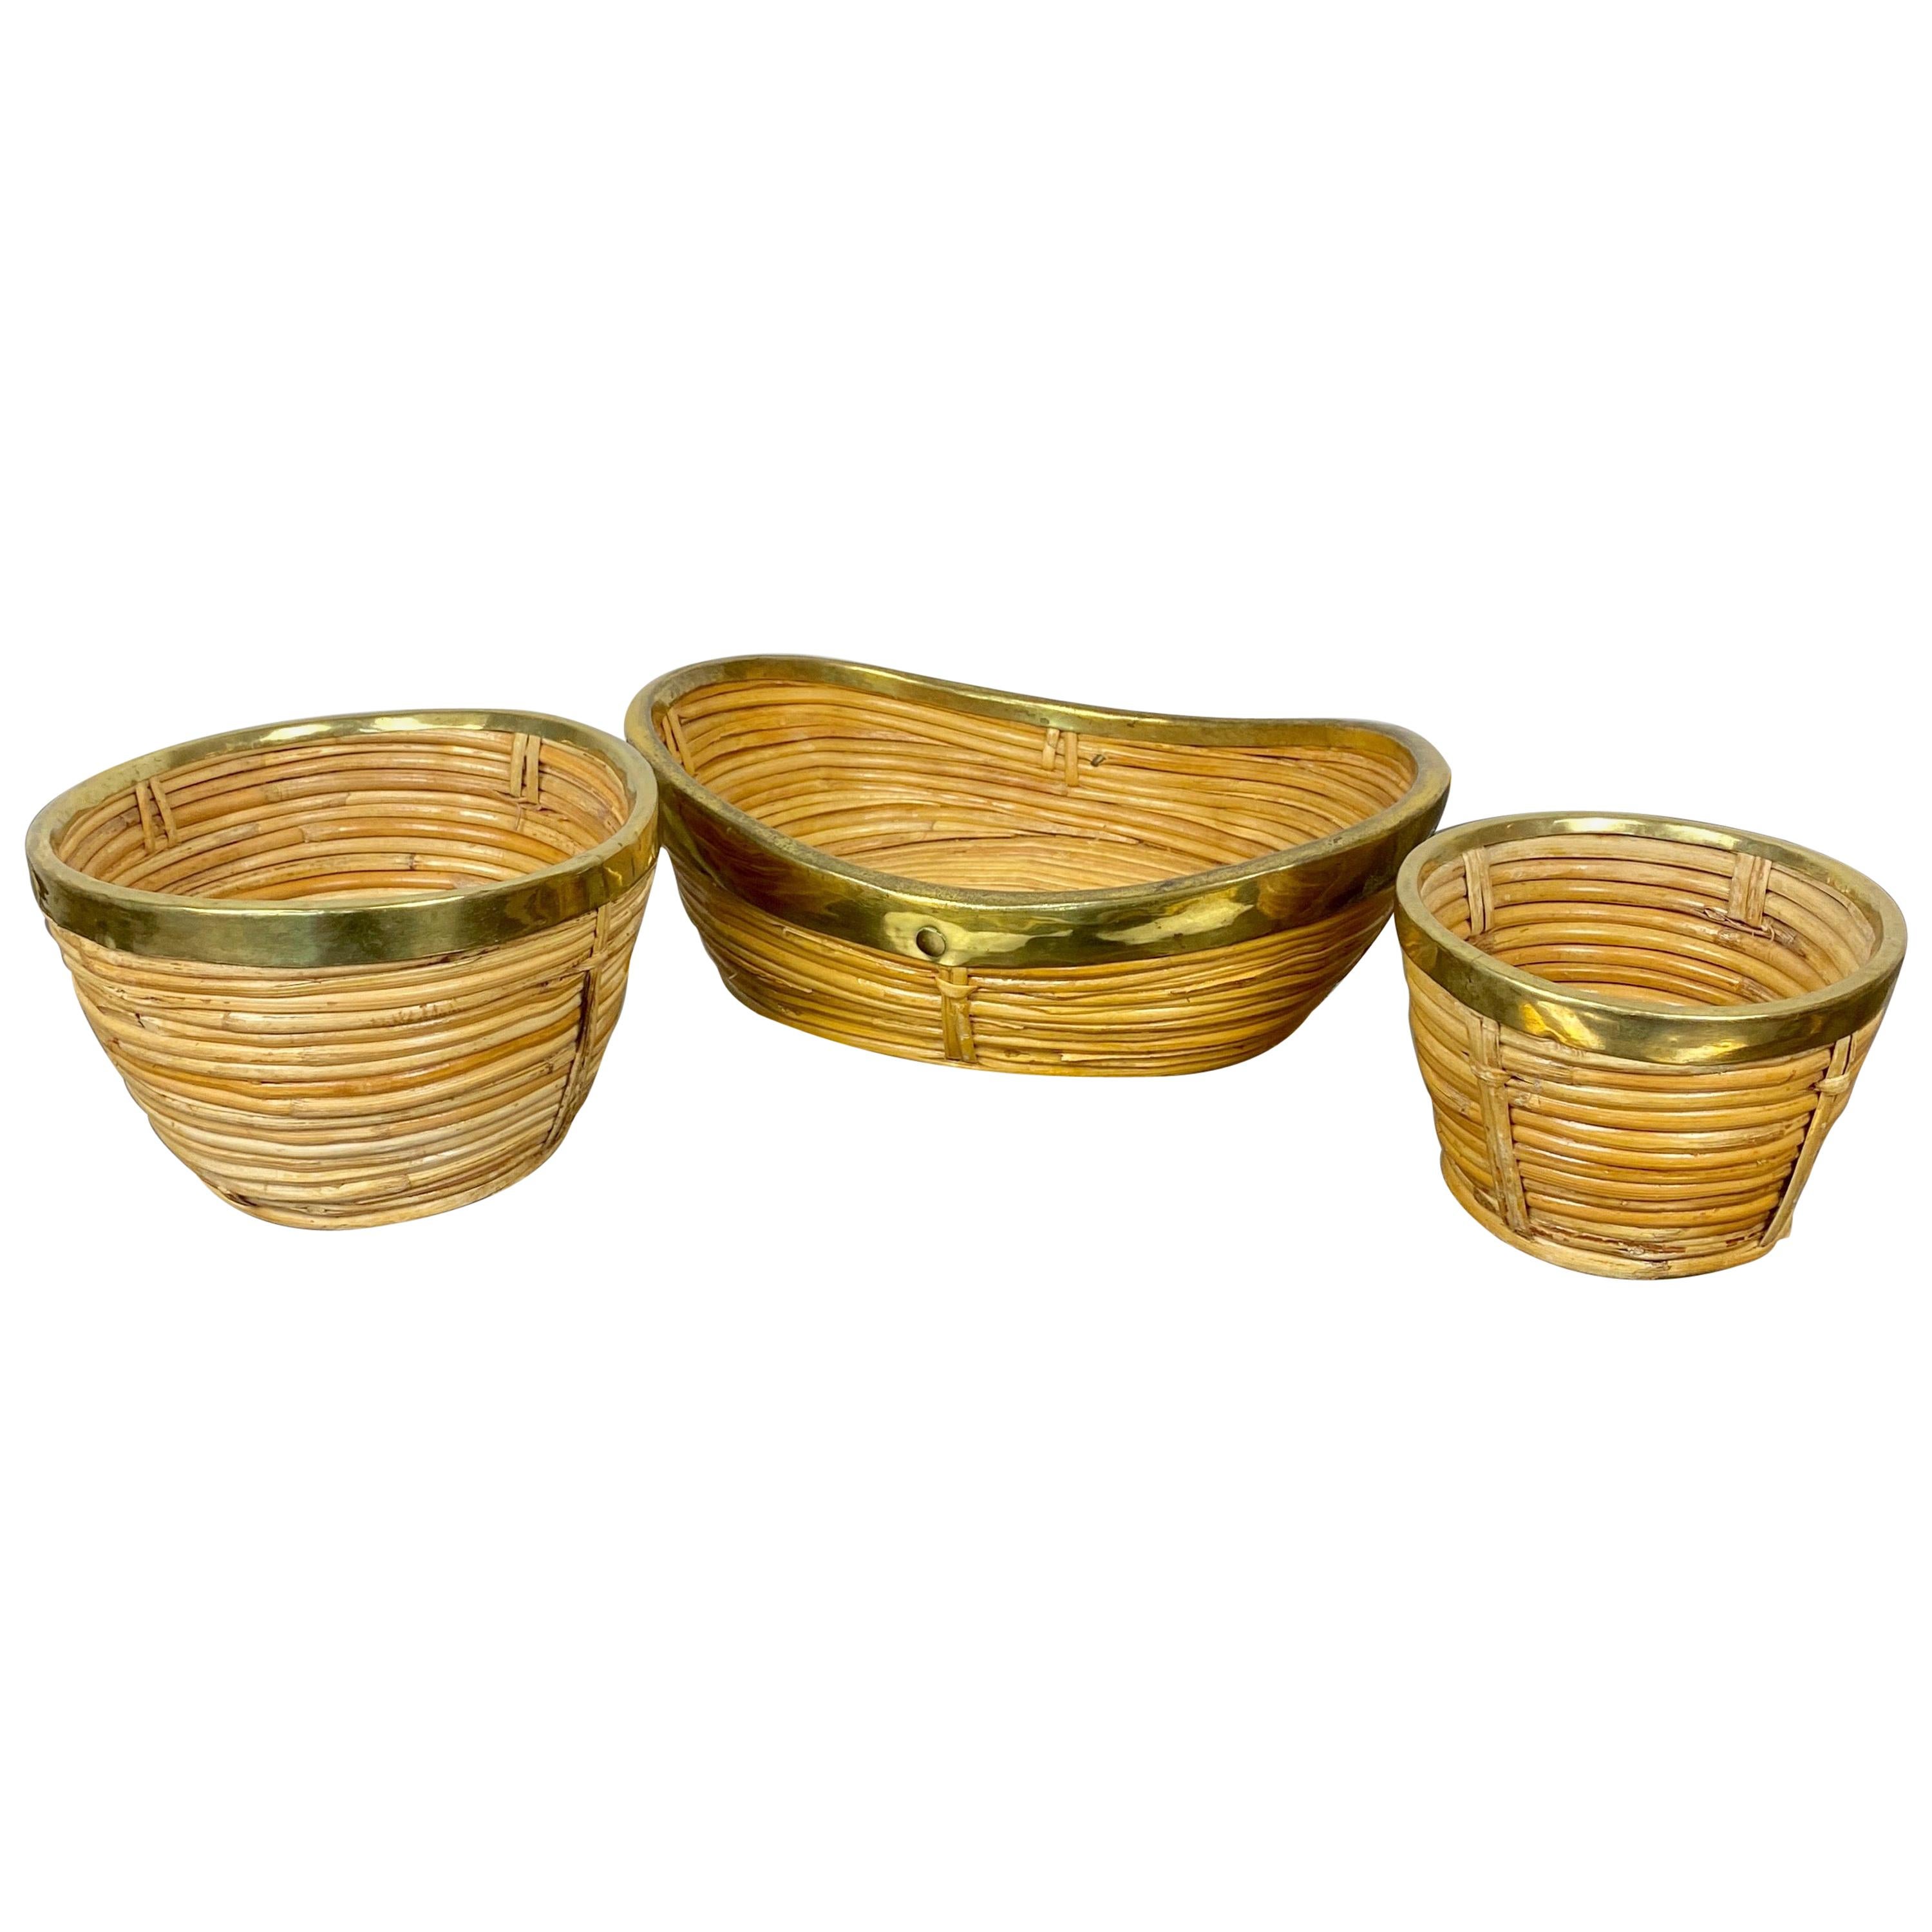 Set of Three Rattan and Brass Basket Bowls, Italy, 1970s